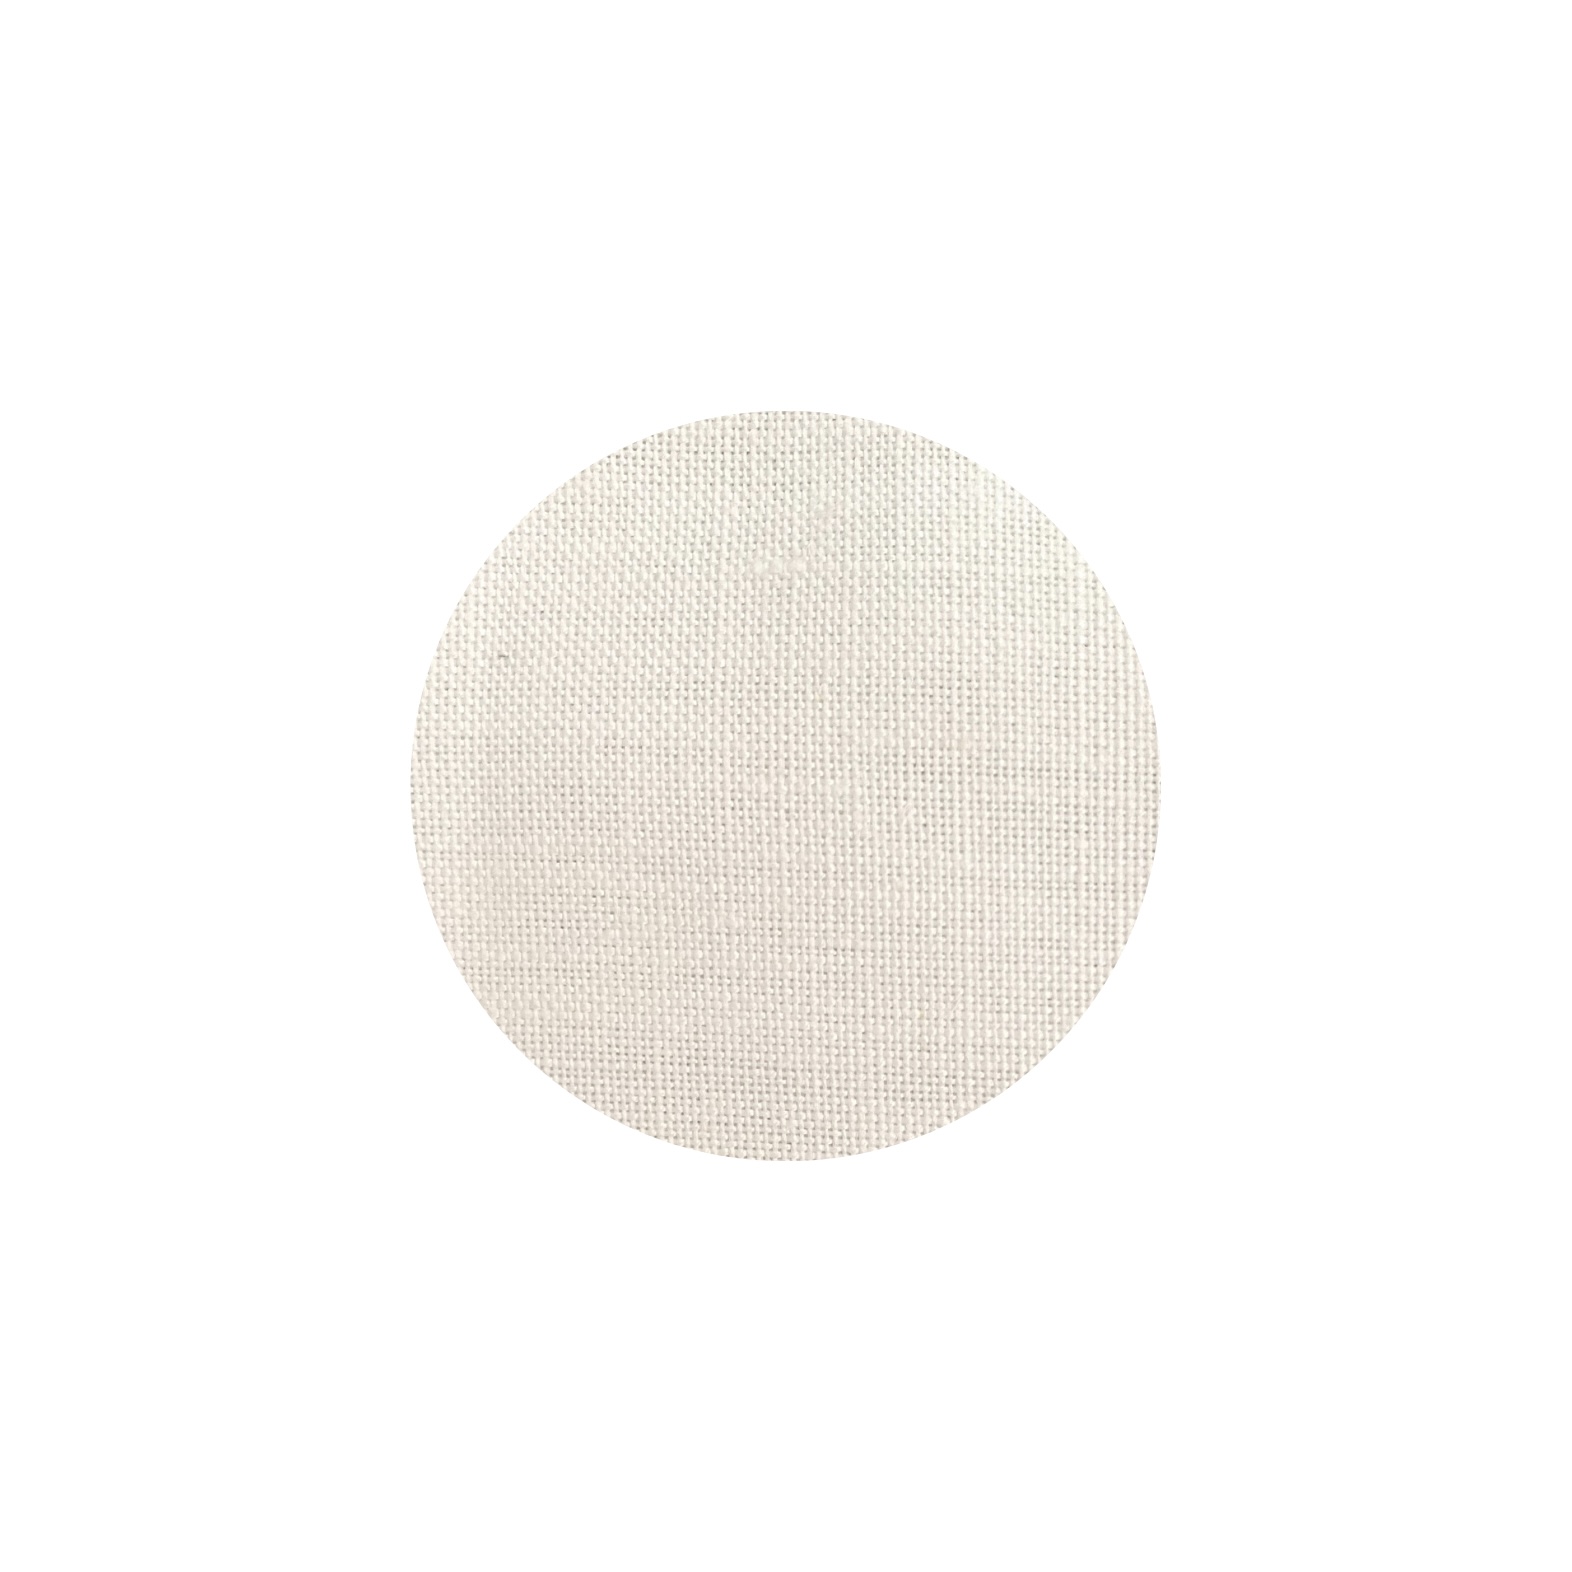 Off-white linen round tablecloth